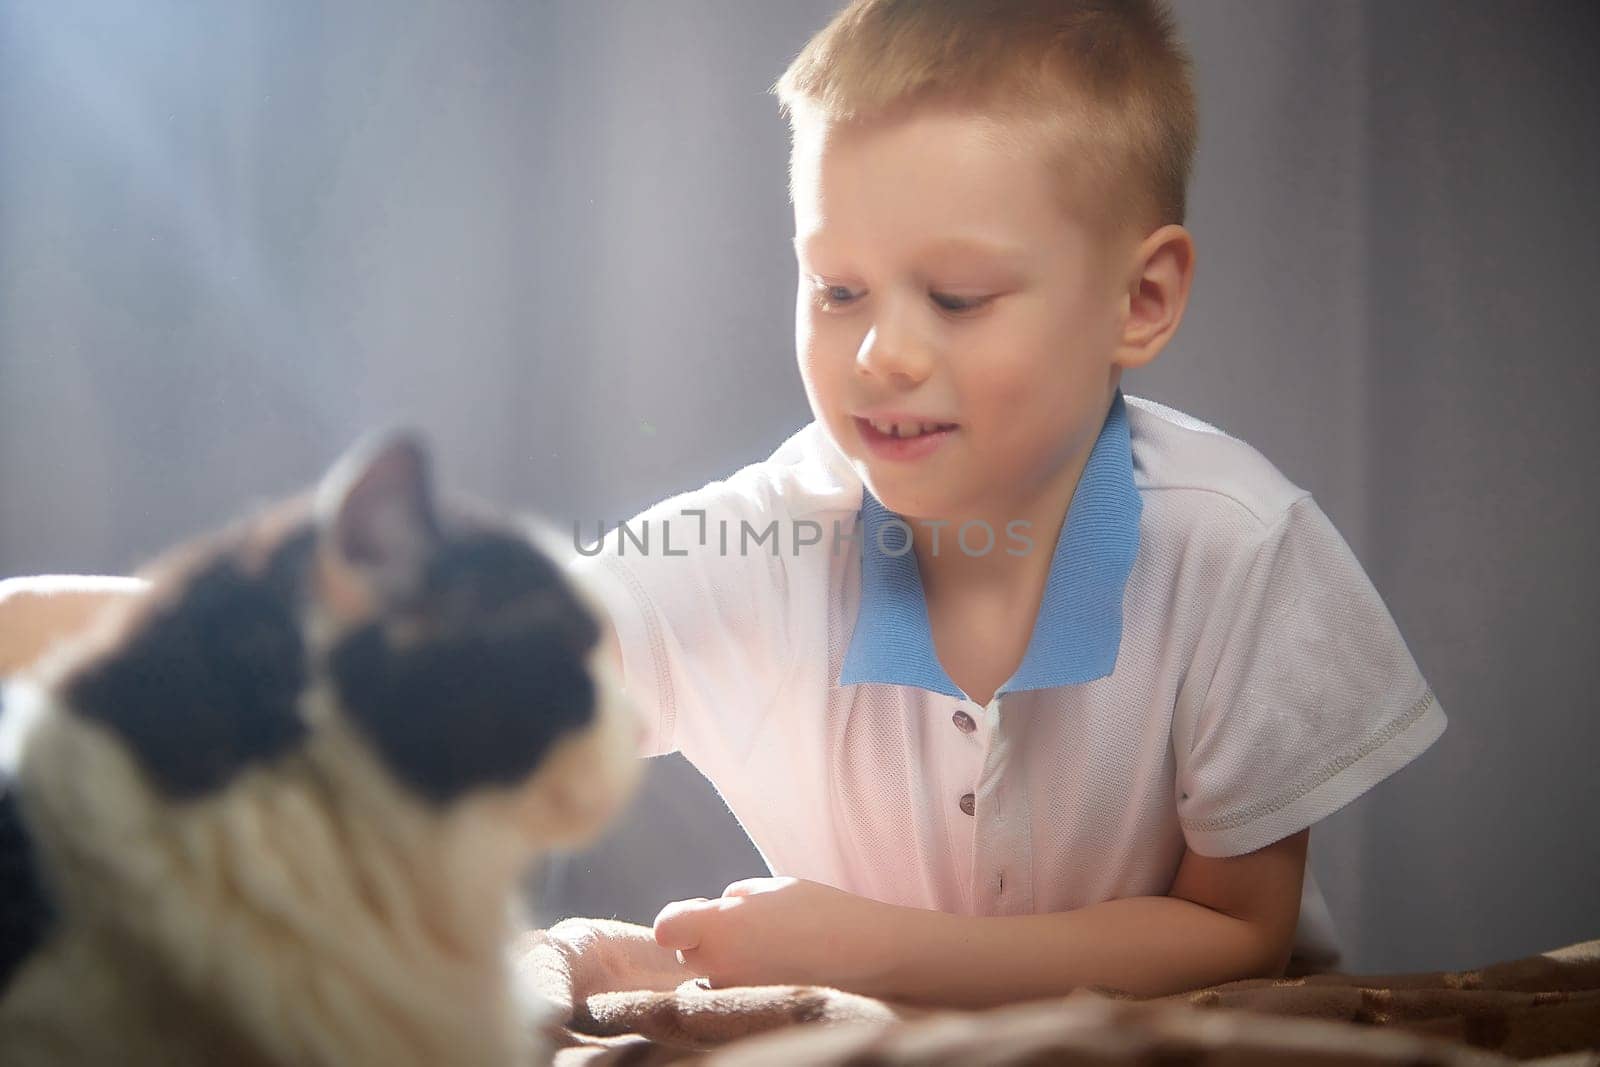 Cute little boy playing with a white and black cat in photo studio with white fabric background. Concept of friendship of child and pet by keleny